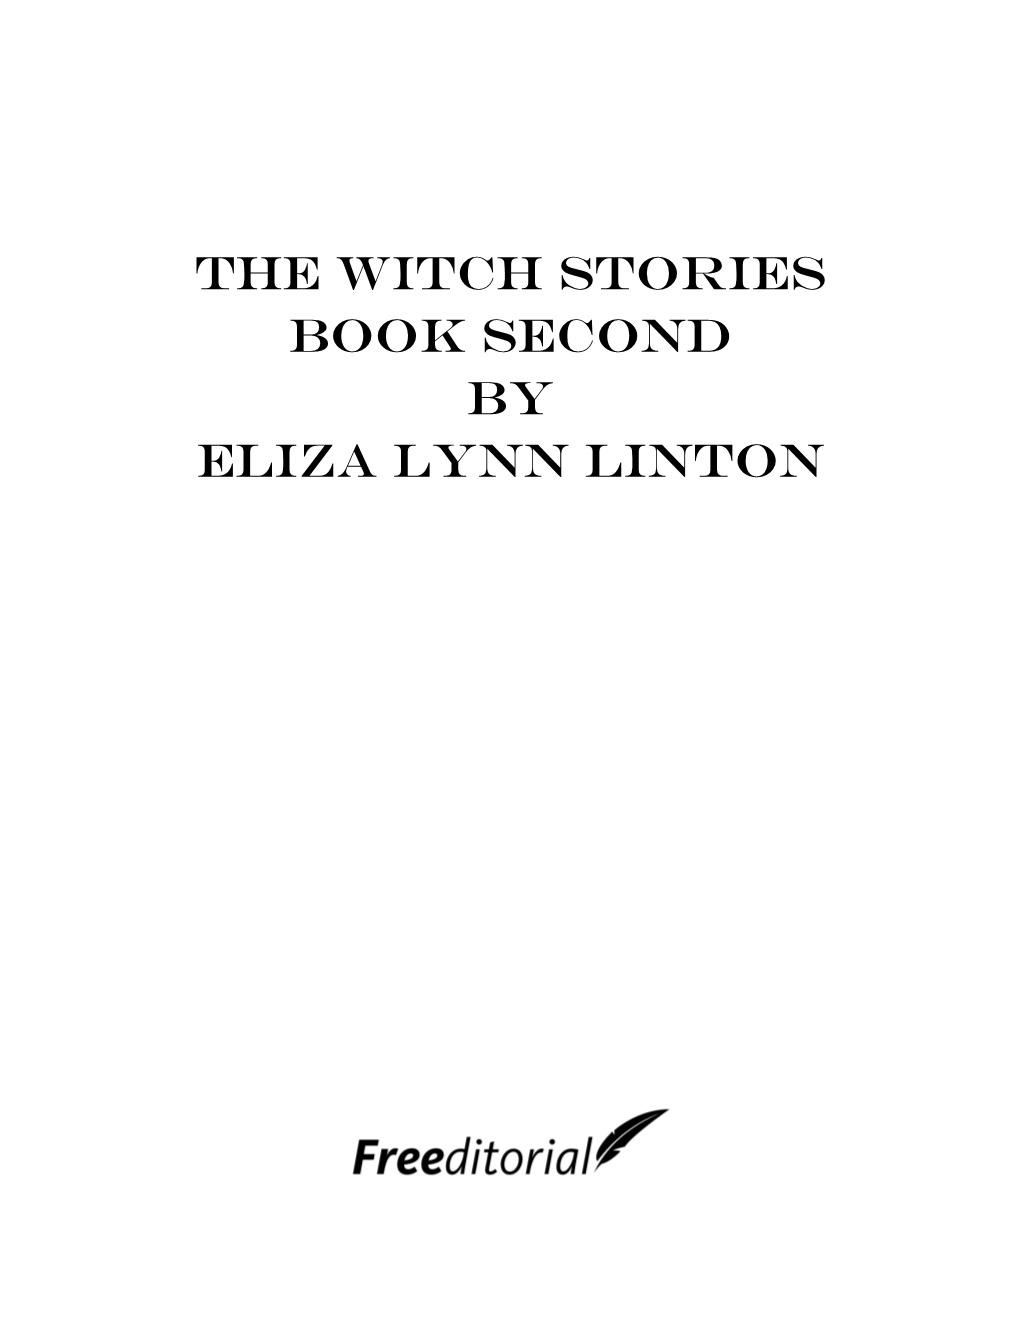 The Witch Stories Book Second by Eliza Lynn Linton